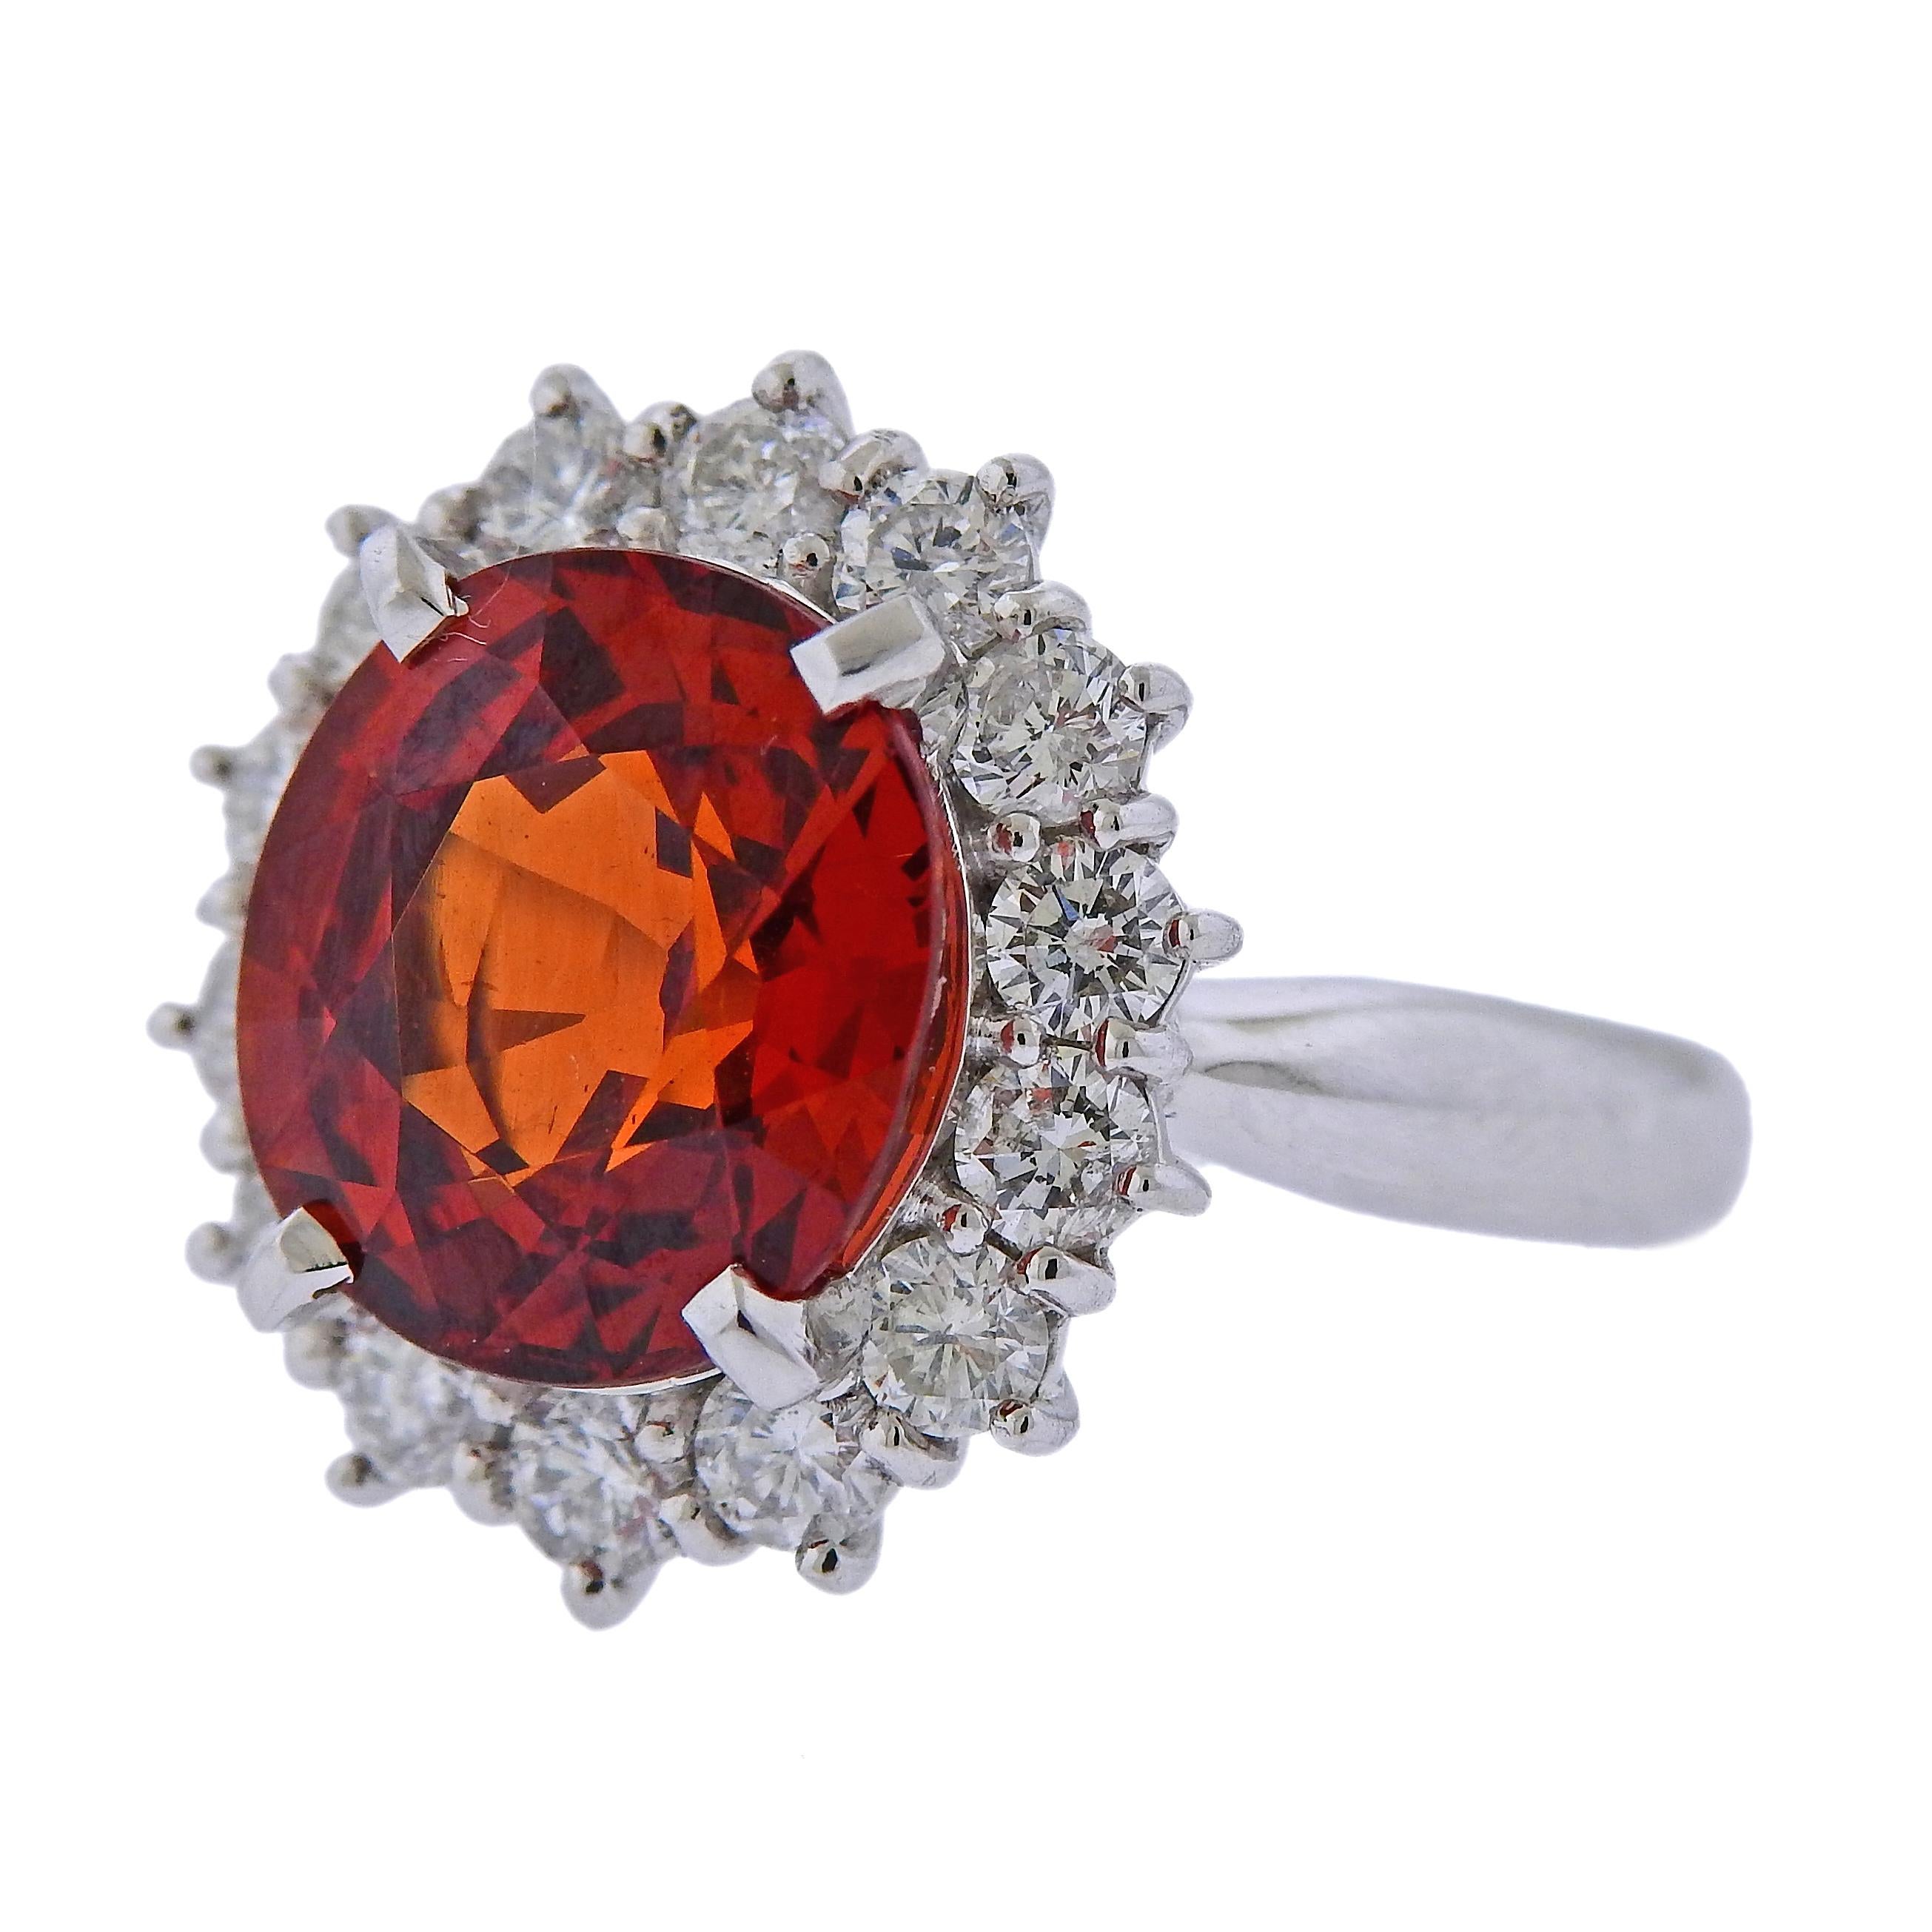 Beautiful platinum cocktail ring, set with a 6.75ct spessartite garnet, surrounded with 1.13ctw in VS/H diamonds. Ring size - 5.75, ring top is 17mm x 15mm. Weight is 11. grams. Marked Pt900, 6.95, D1.13.
